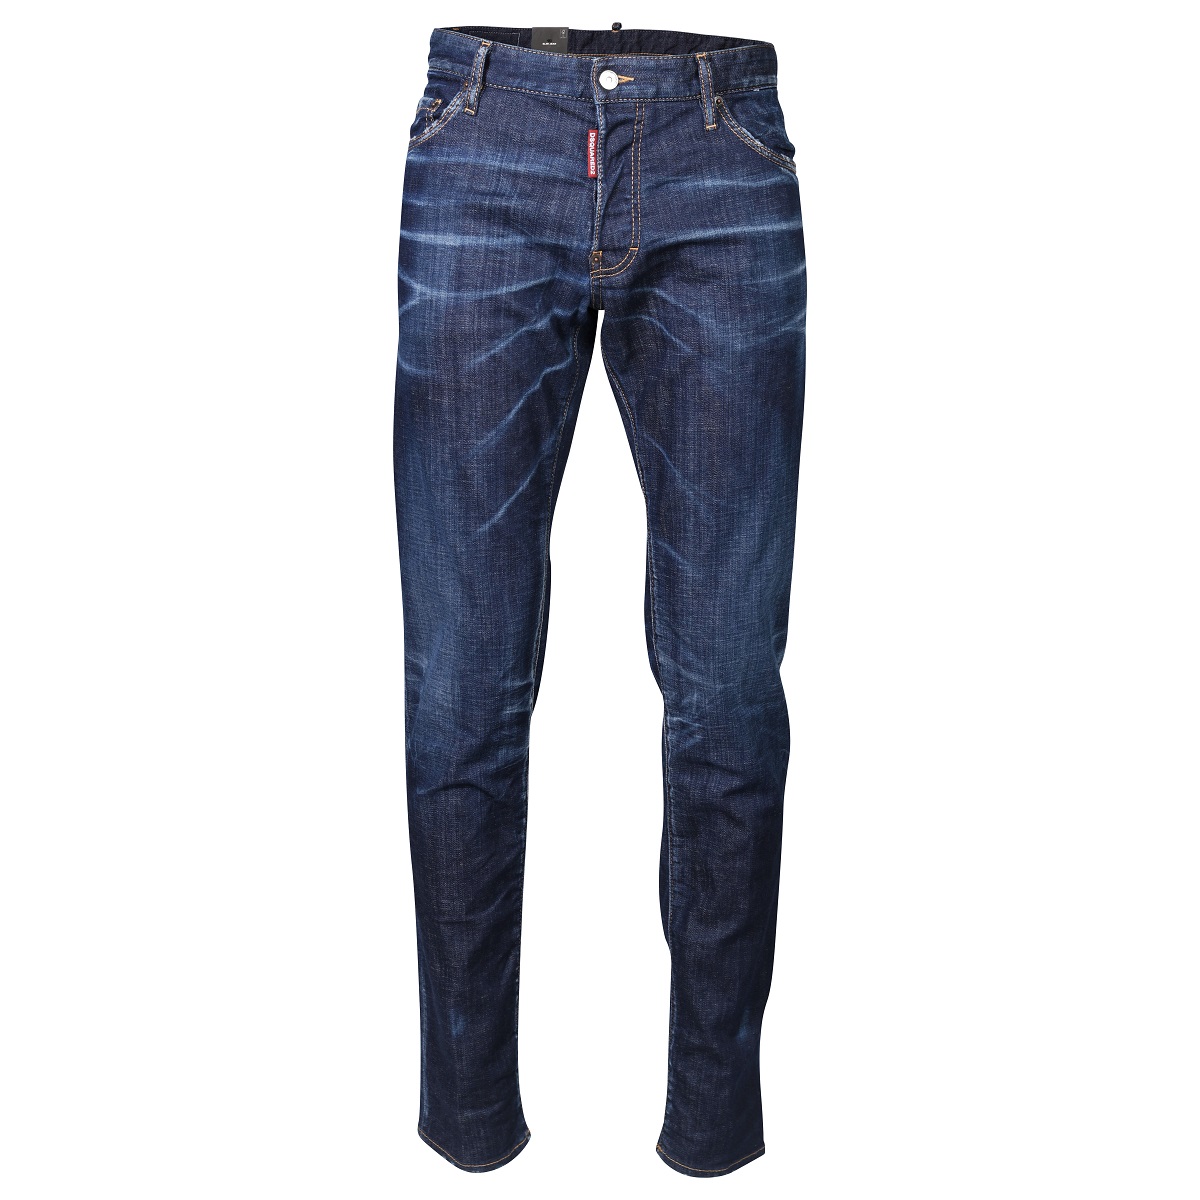 DSQUARED2 Jeans Slim in Washed Dark Blue 46